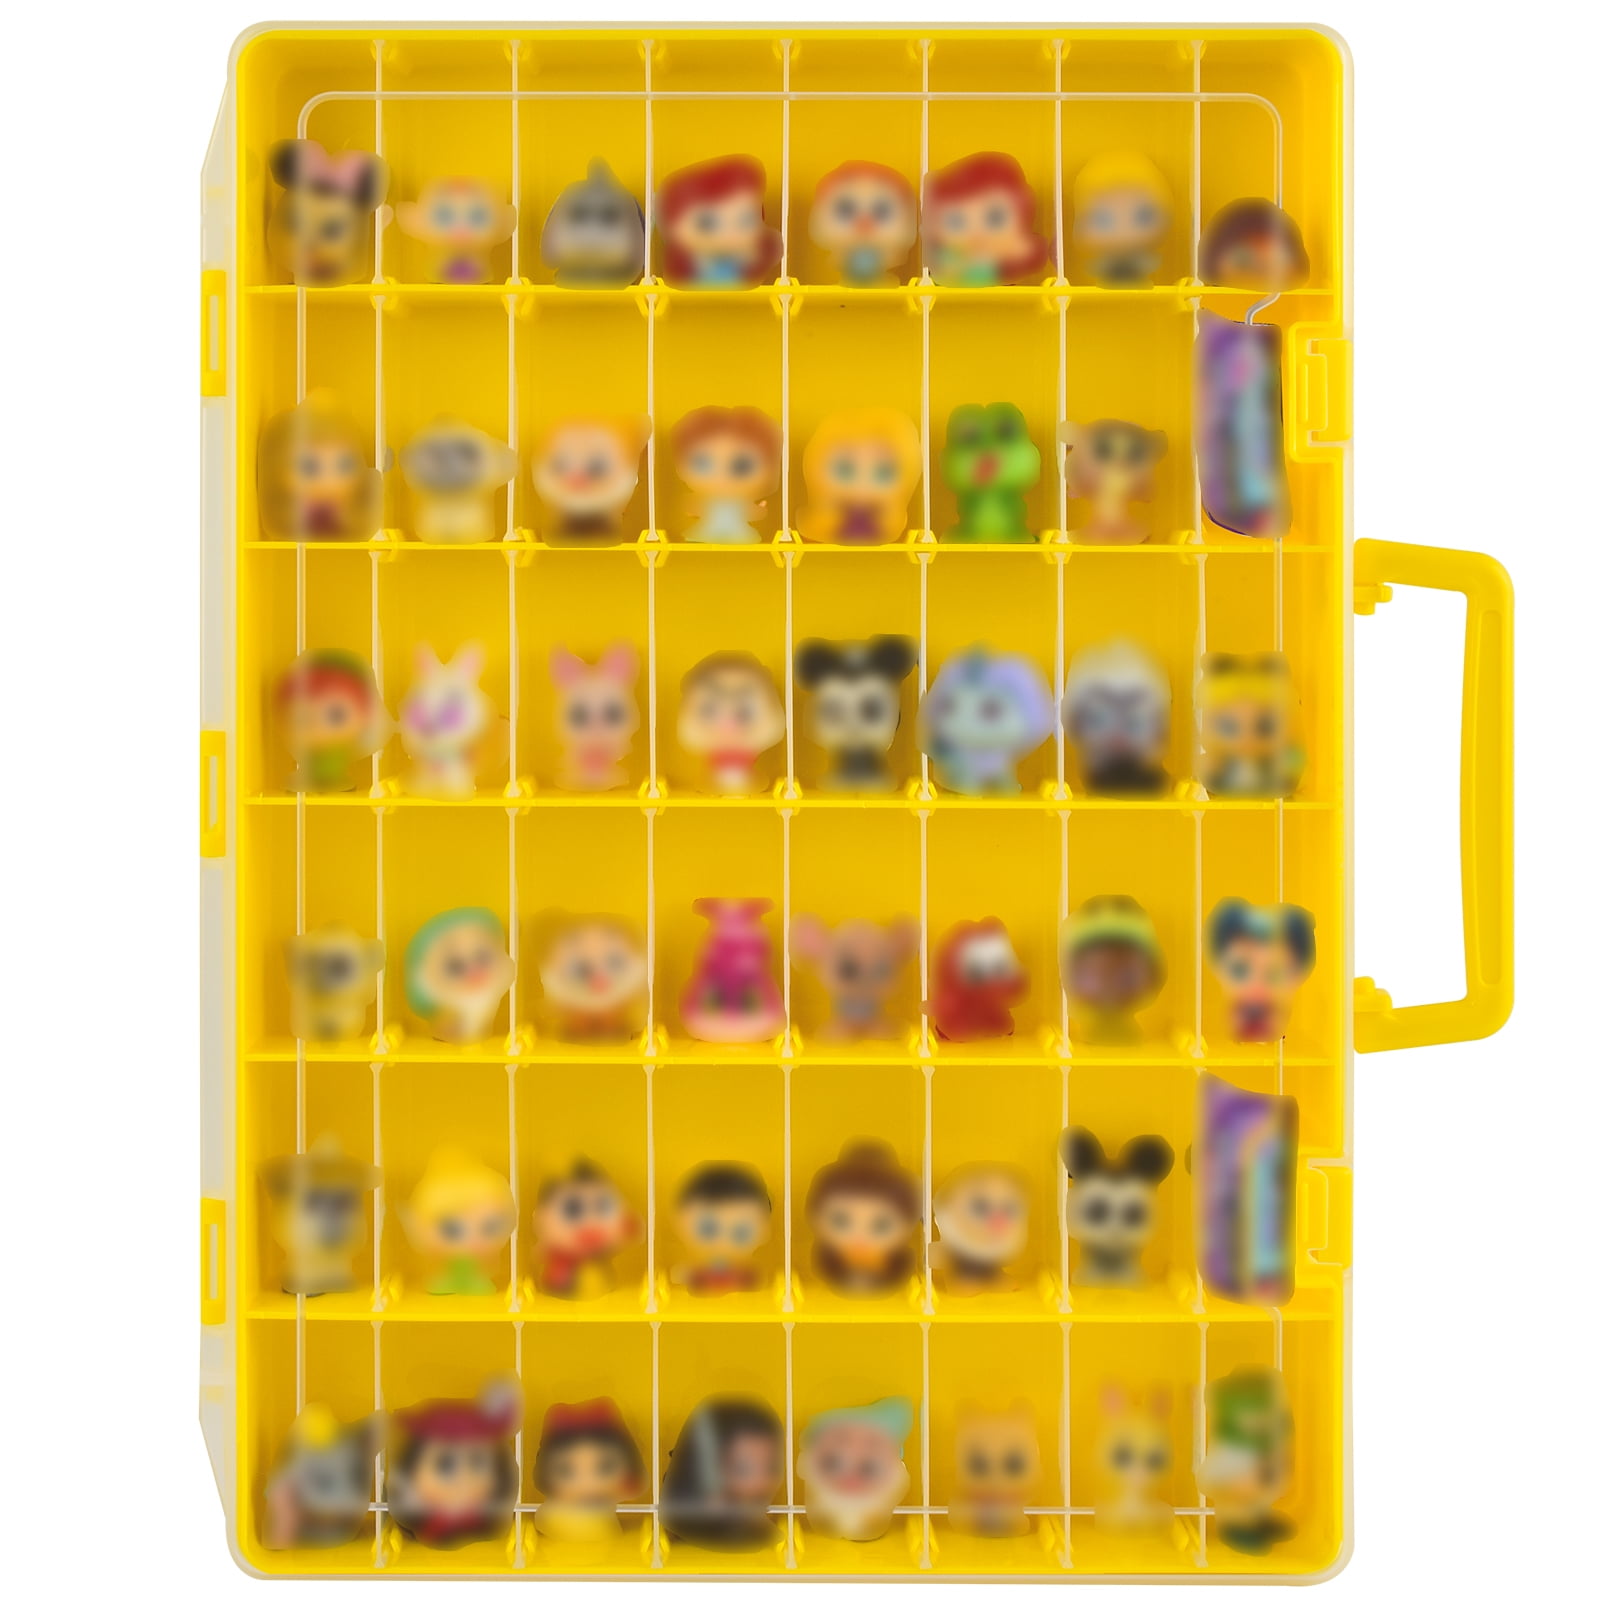 Fullcase Case Compatible with Disney Doorables Multi Peek Series 8 7 6 5,  Double-Layer Kids Toy Display Storage, Collectible Mini Figures Playset